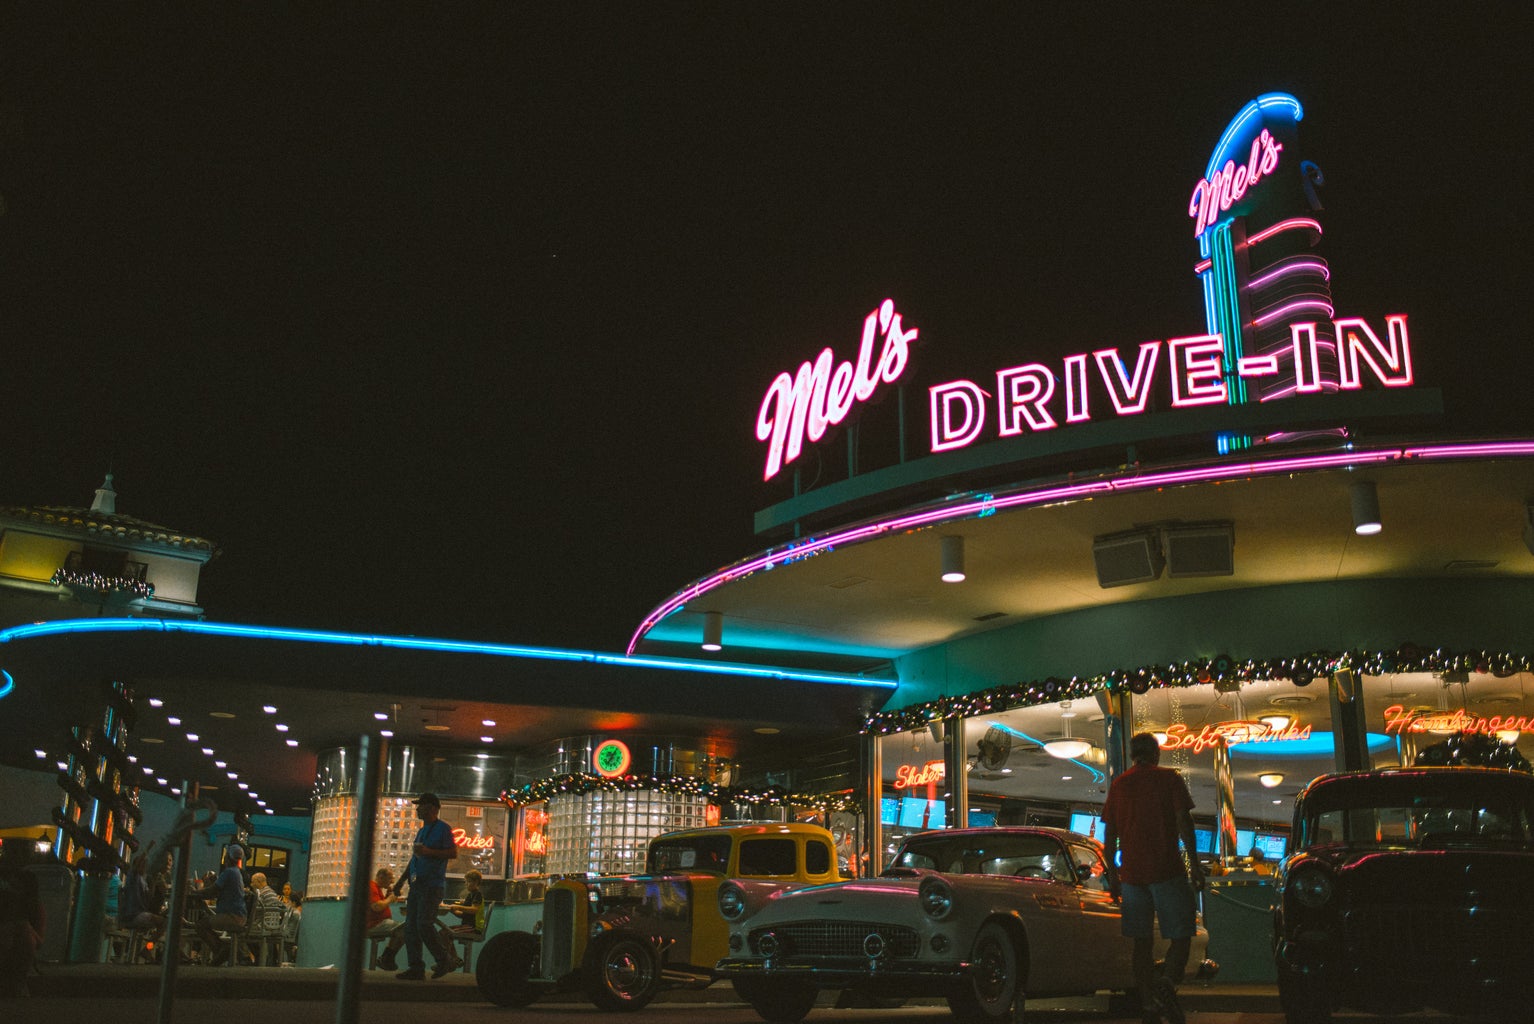 drive-in diner with neon signs and cars